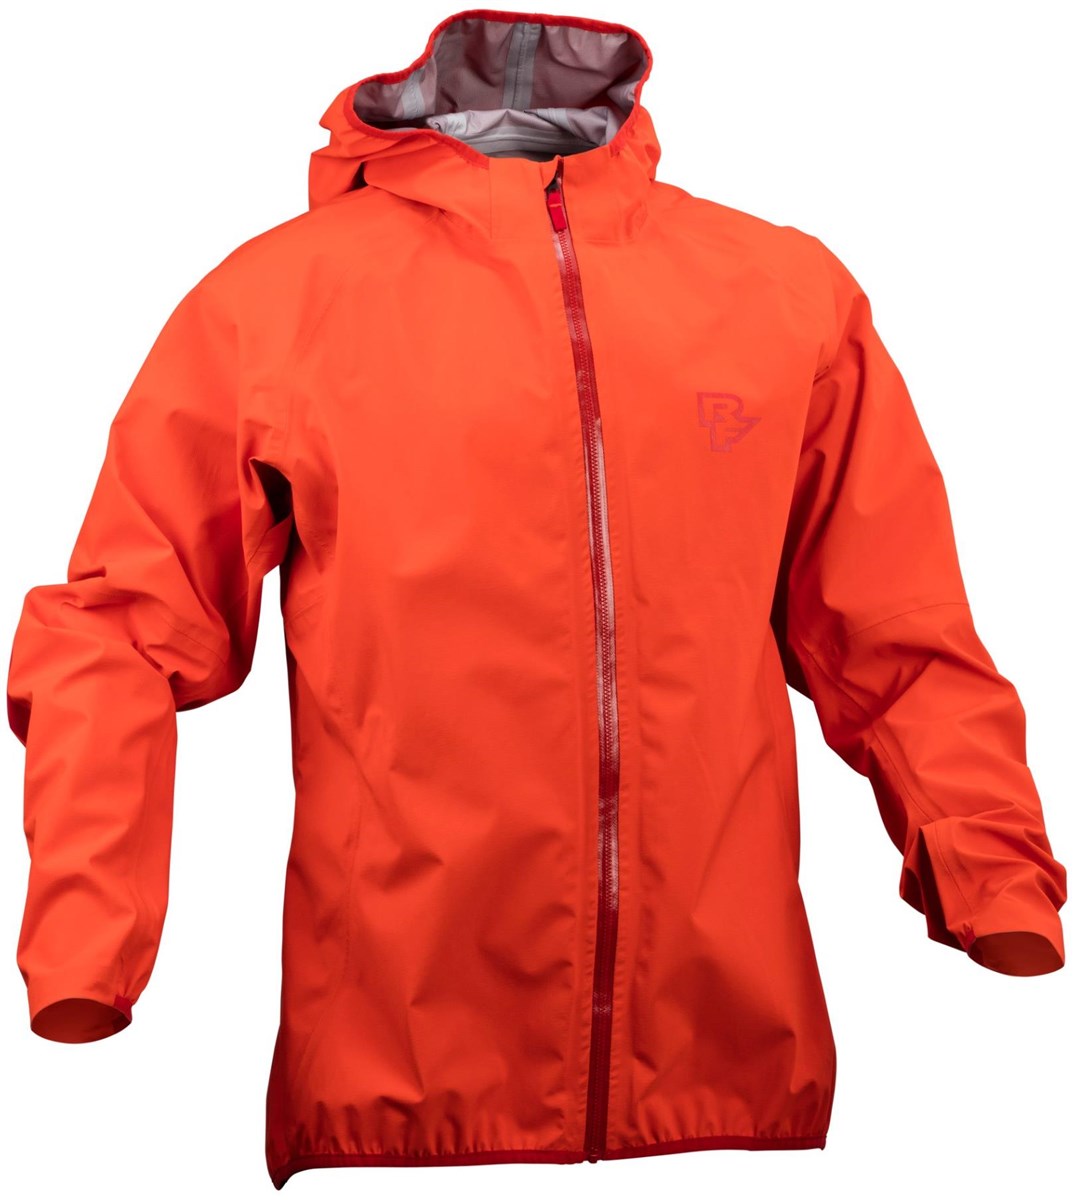 Race Face Conspiracy Jacket product image